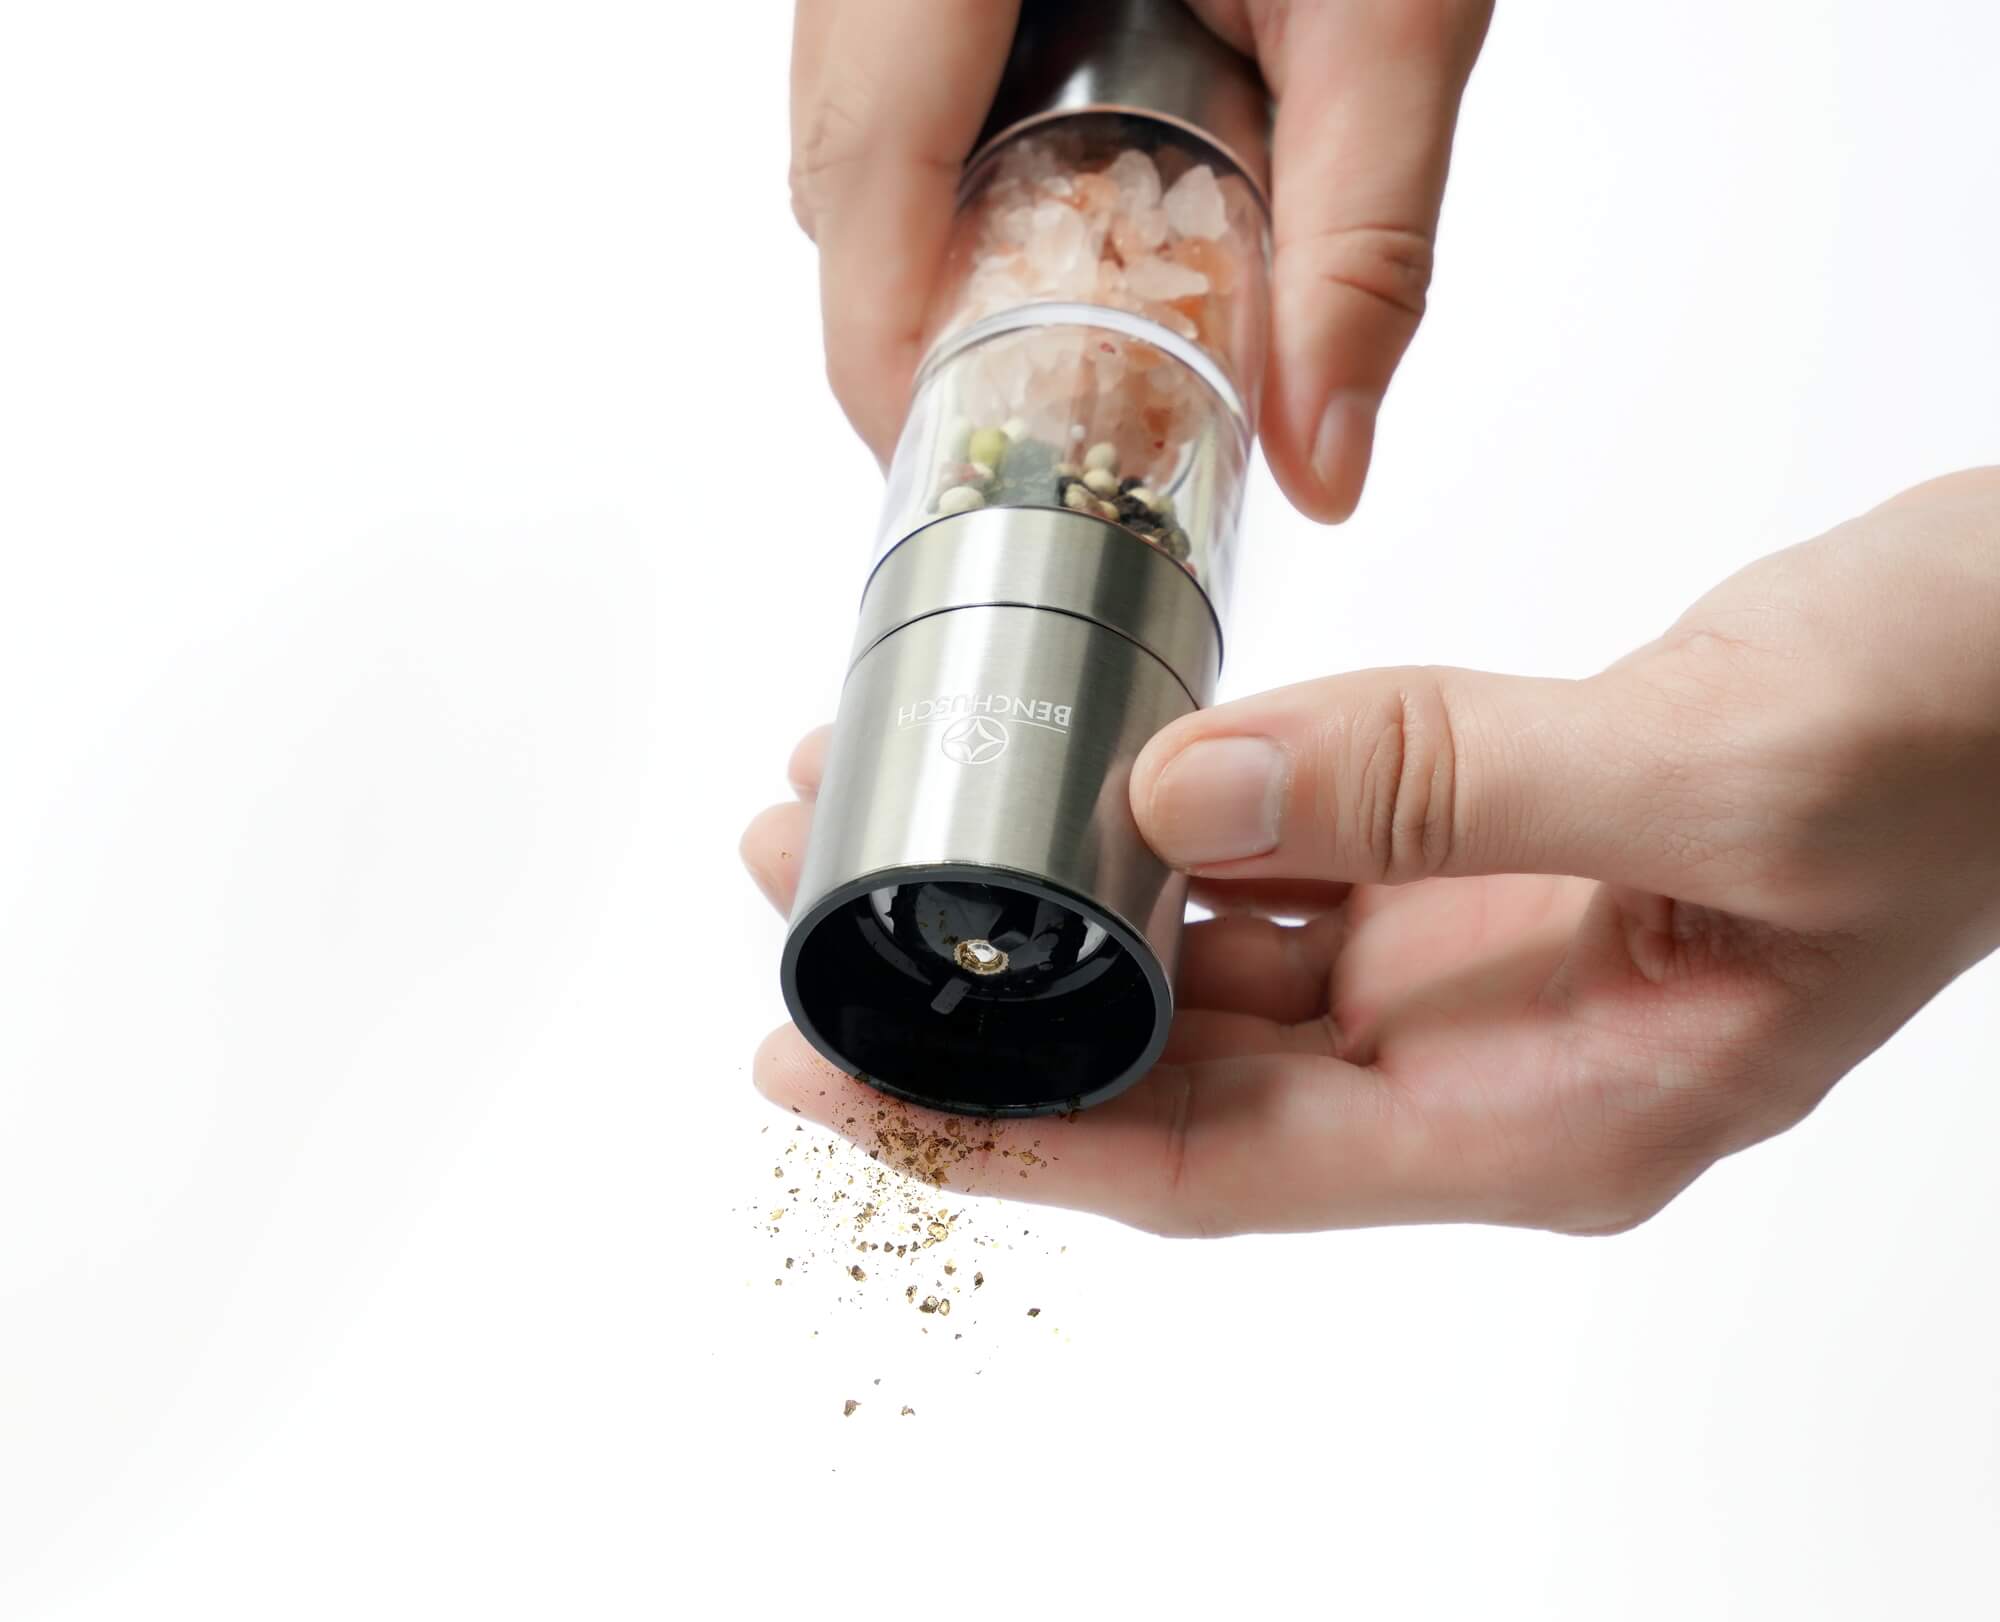 Twisting the cover to grinding pepper with Benchusch Compact 2 in 1 Salt and Pepper Grinder